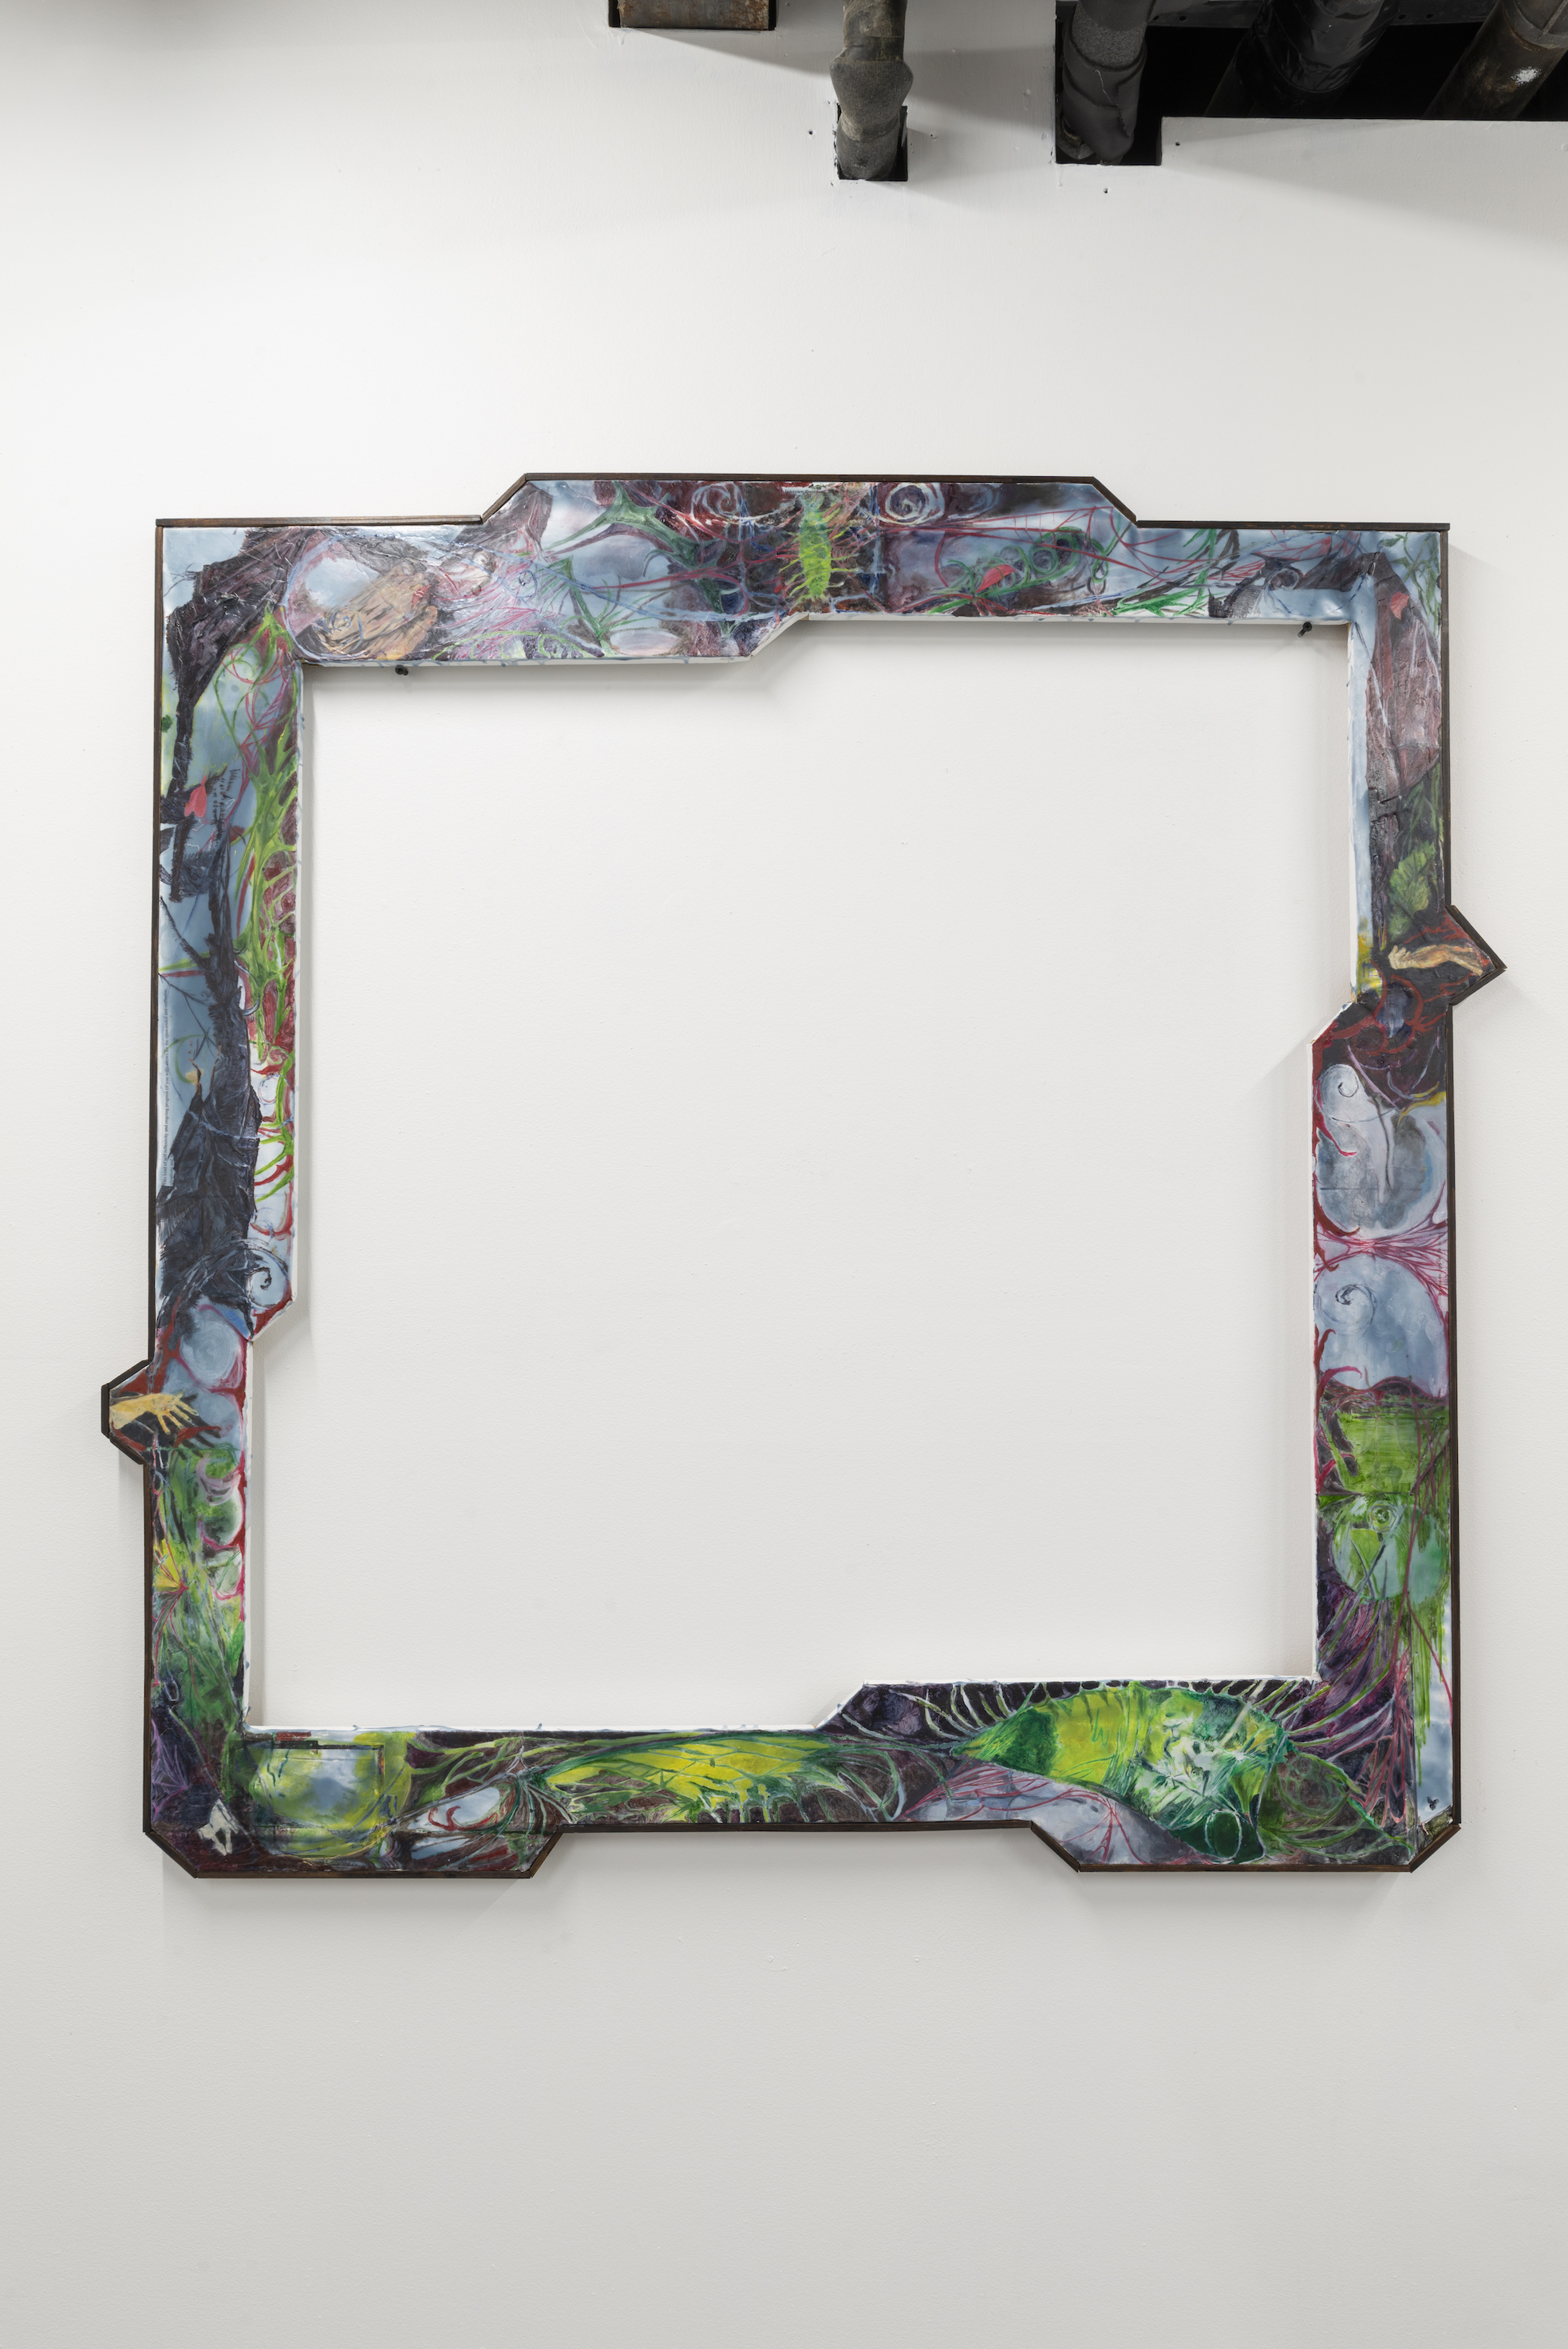  Nikholis Planck,  Interview Questions,  2019, Water soluble oil and collage on wax on canvas mounted to wood in walnut stained artist frame 46.75 x 46.5 inches 